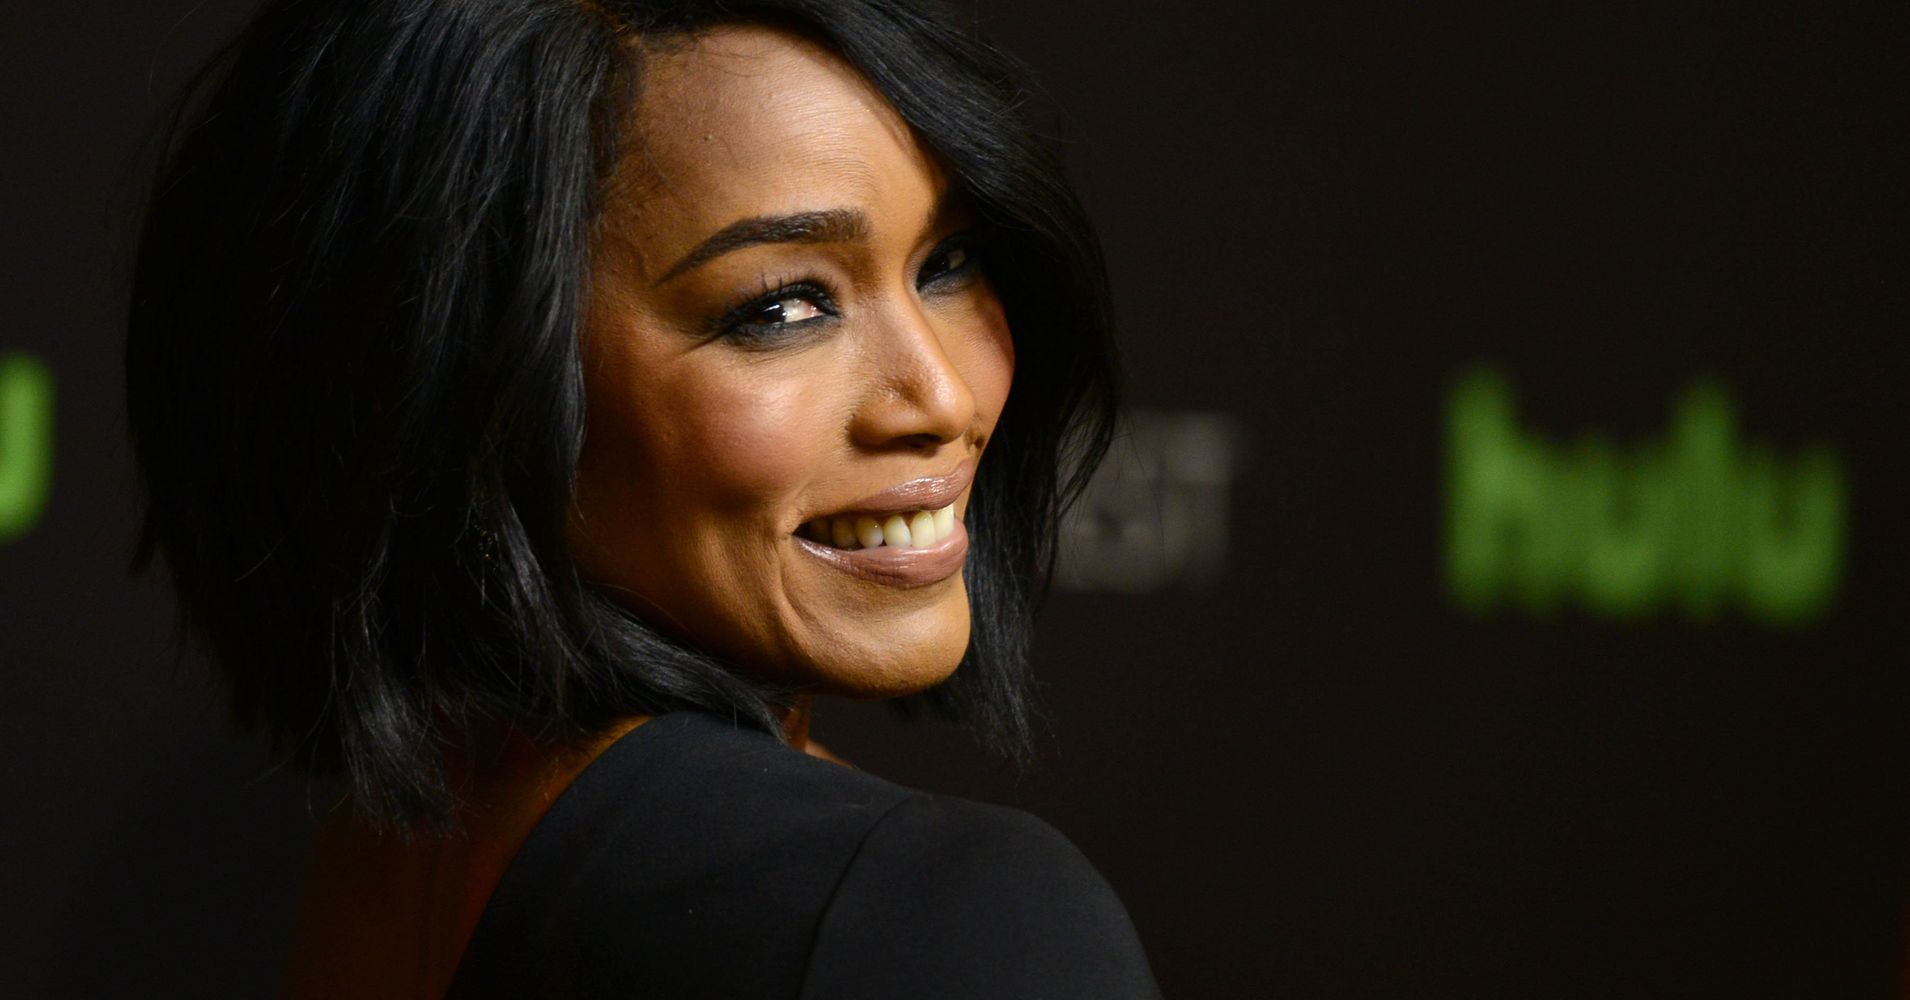 Angela Bassett Is Honoring Her Late Mom With This Health Campaign